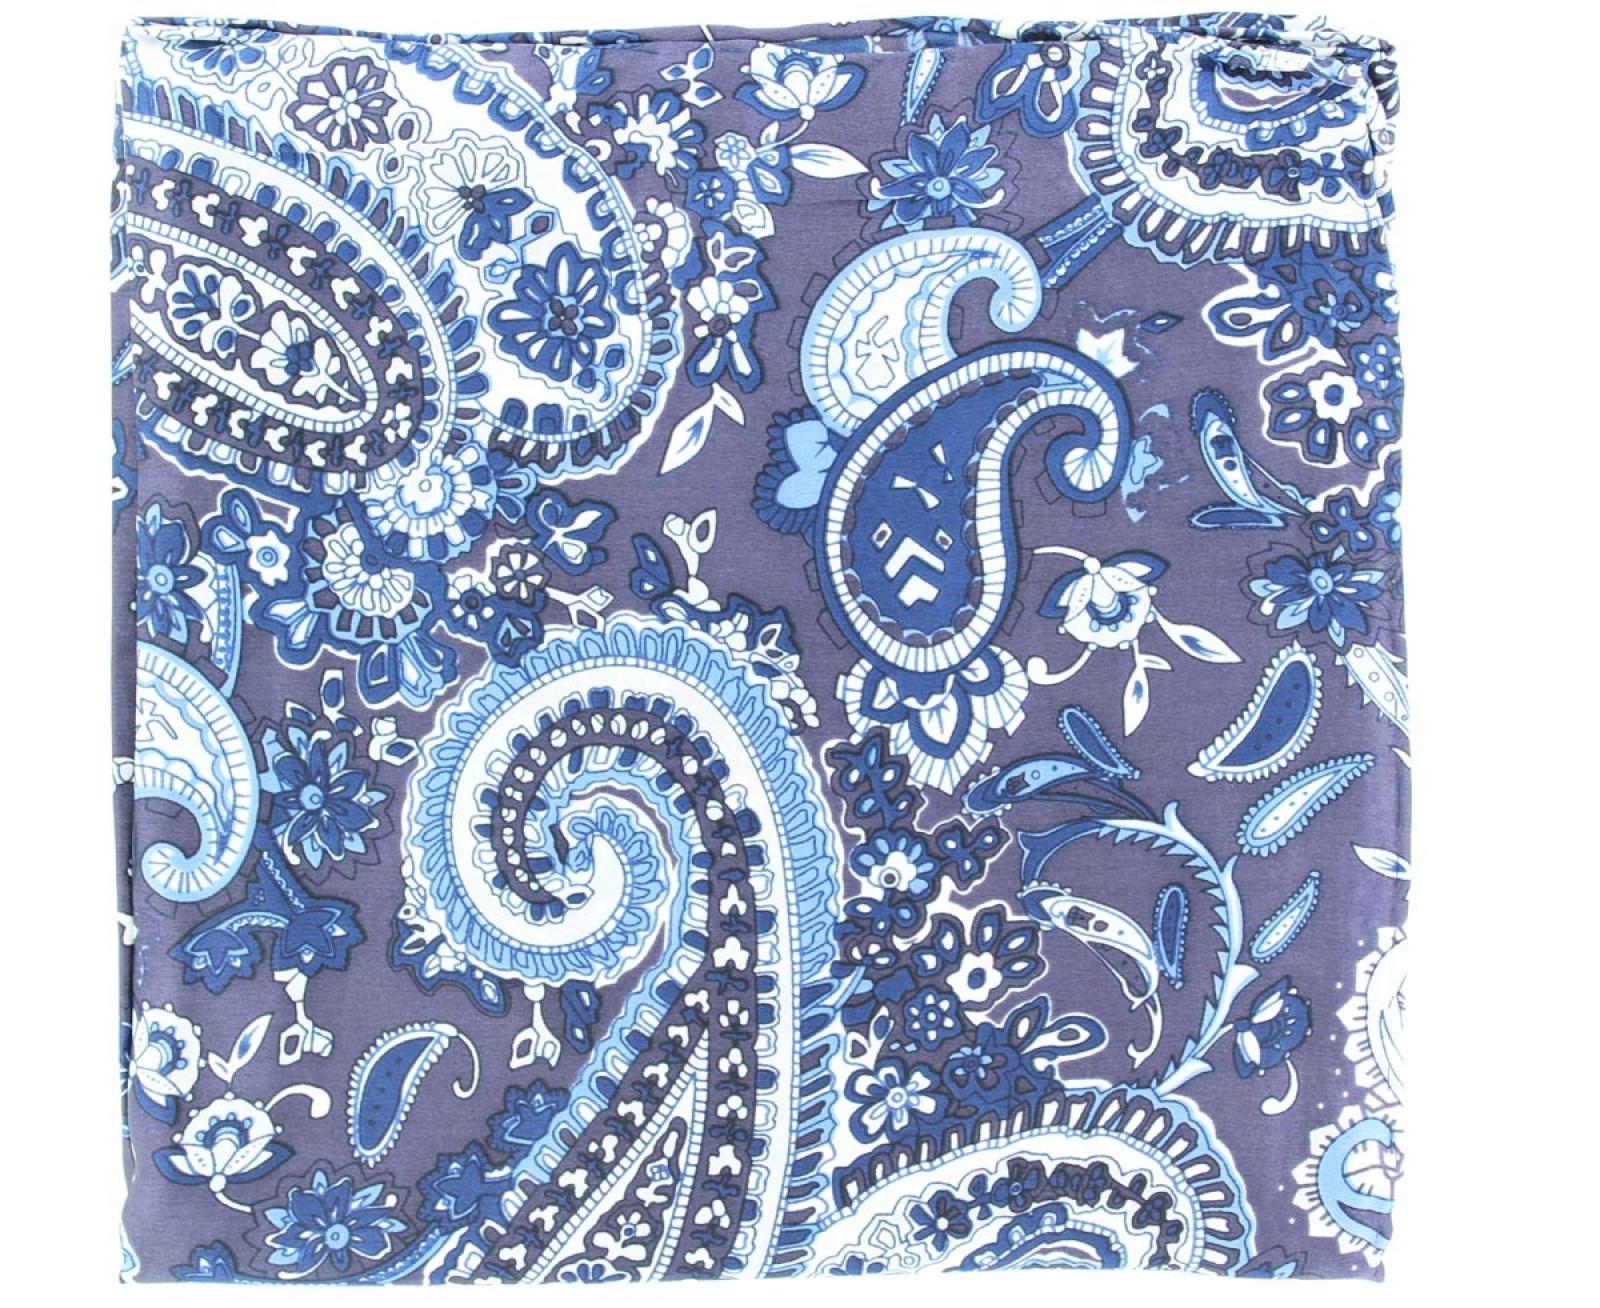 M&F Western Products Paisley Wild Rags Blue